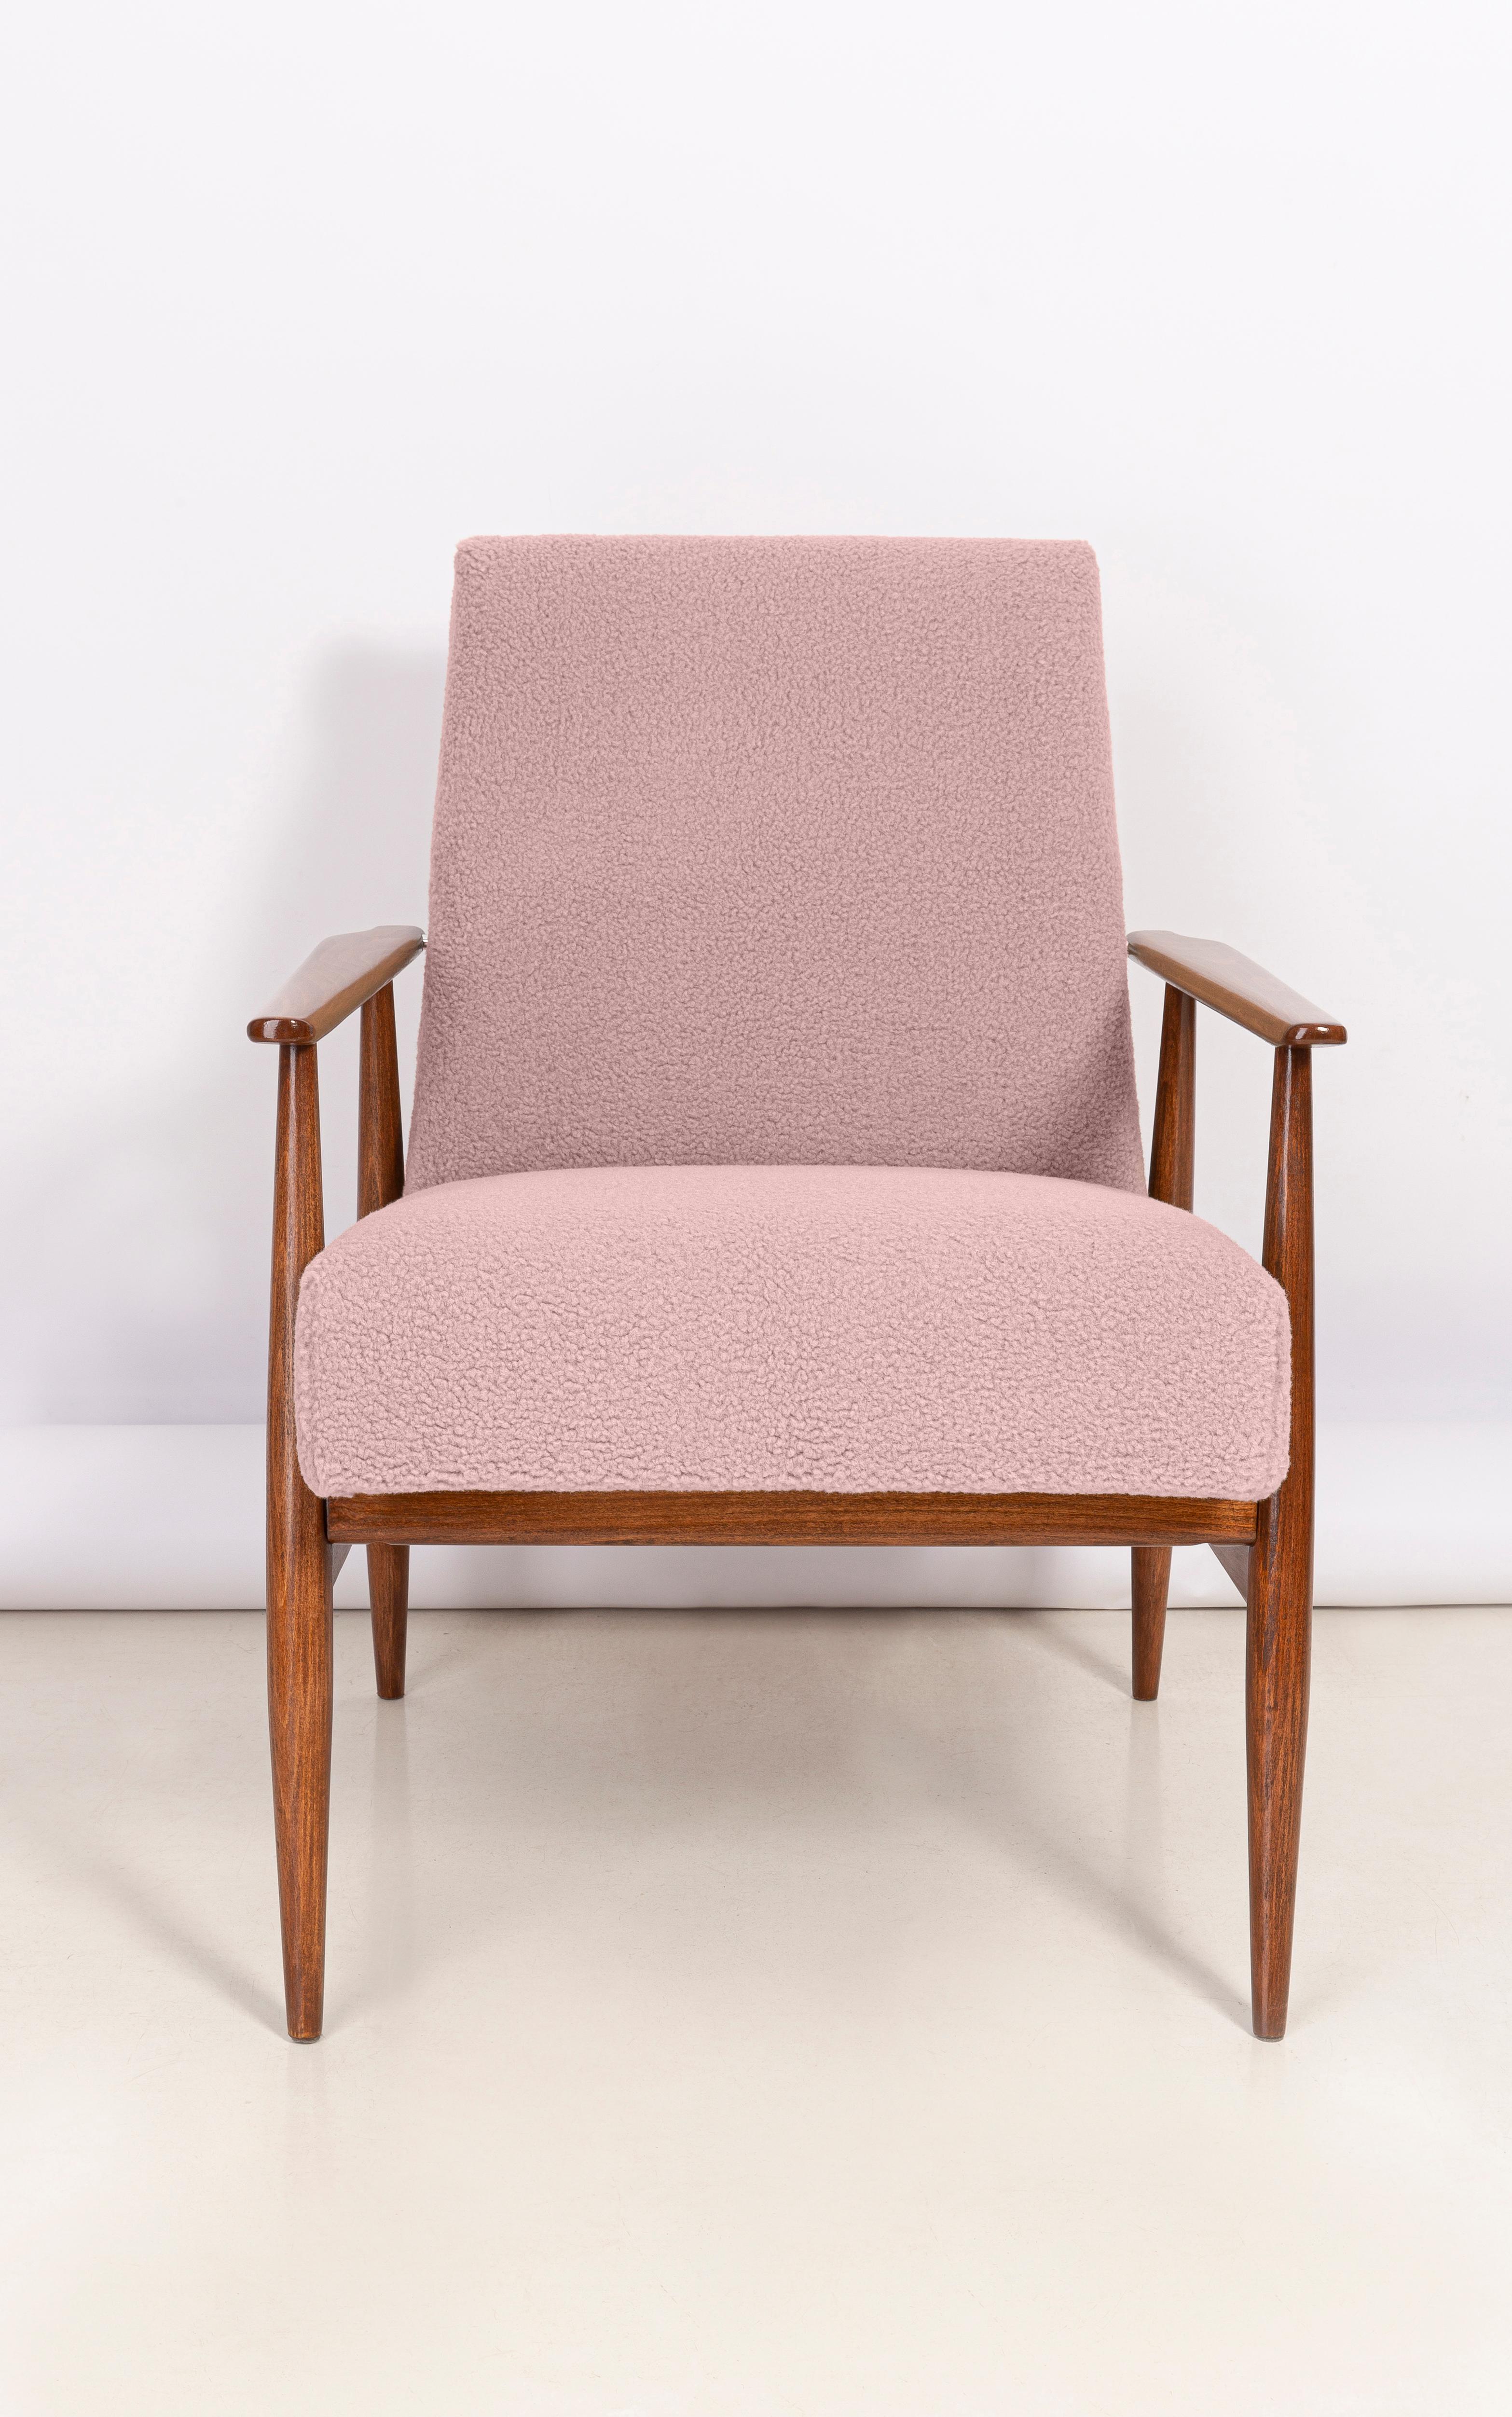 Hand-Crafted Six Dusty Pink Bouclé Dante Armchairs, H. Lis, Europe, 1960s For Sale